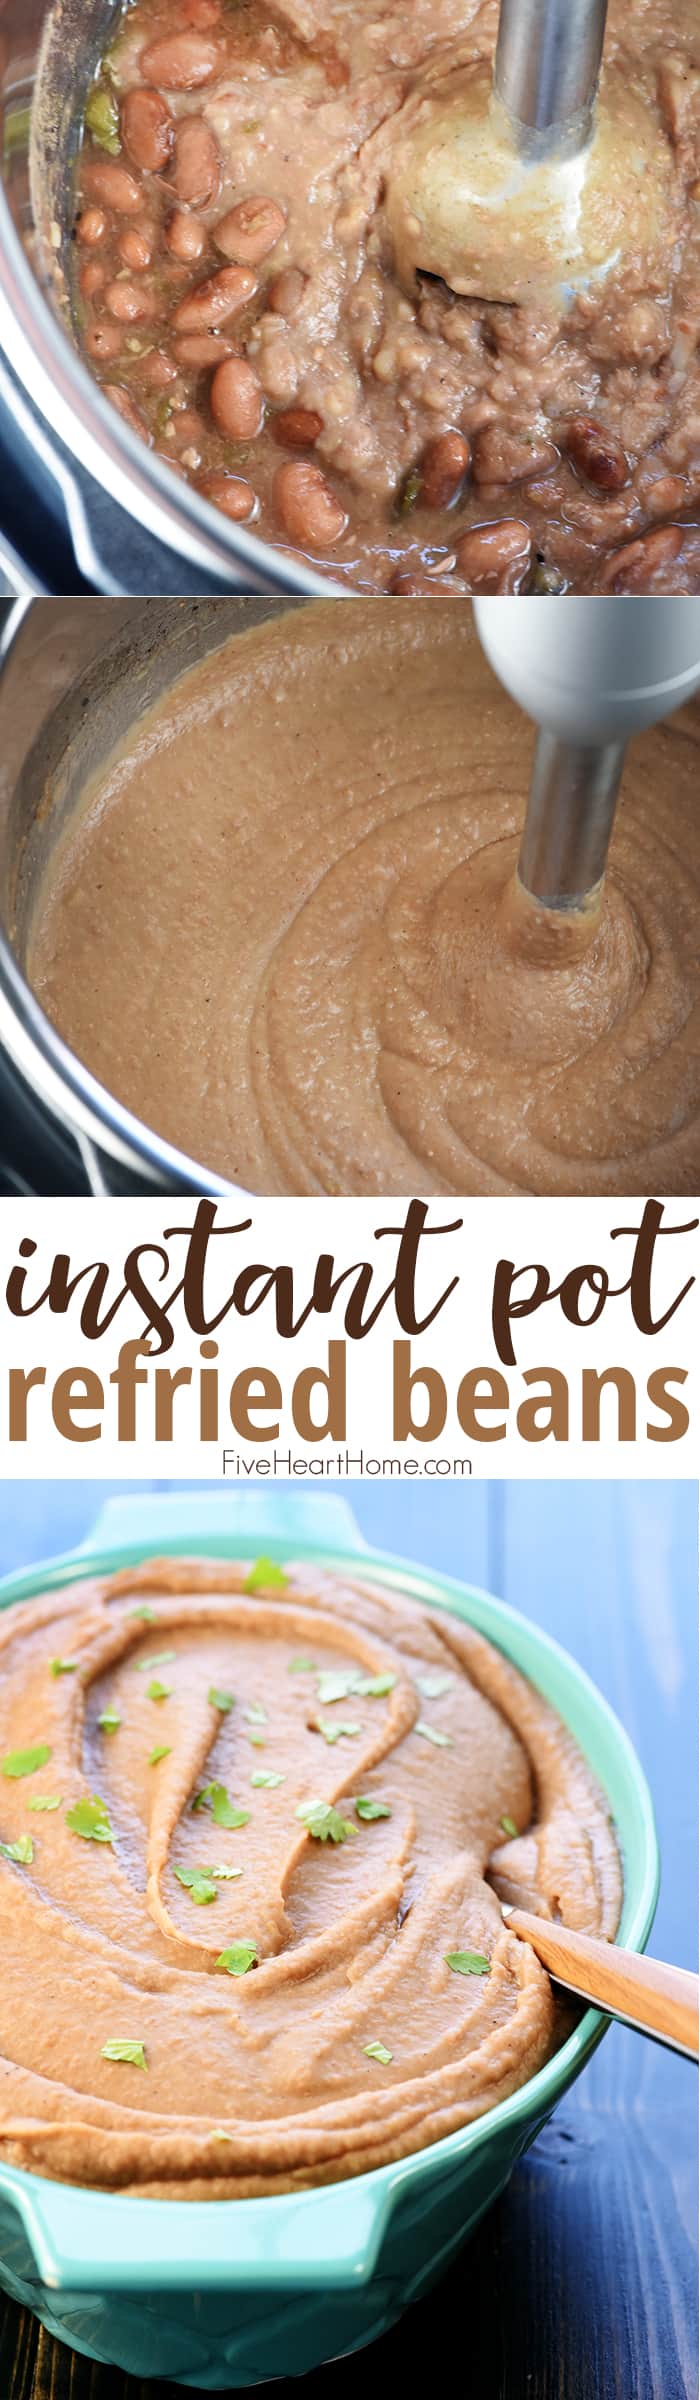 Instant Pot Refried Beans are creamy, flavorful, and effortless to make in the pressure cooker, with no soaking required. This refried beans recipe is the perfect side dish for all of your favorite Mexican food! | FiveHeartHome.com via @fivehearthome